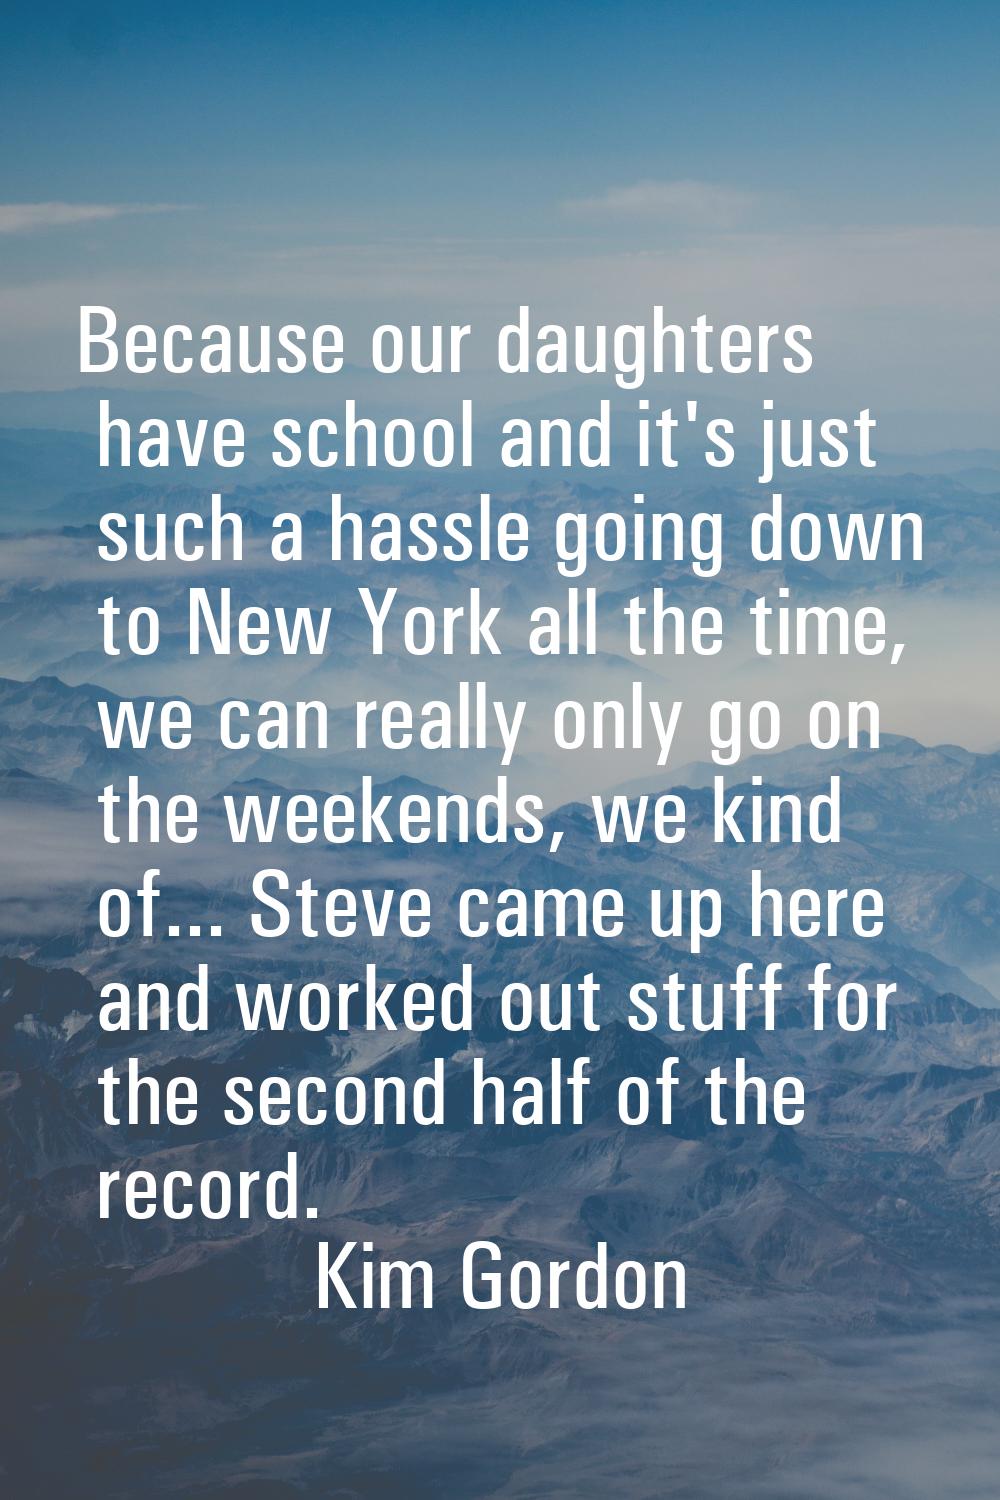 Because our daughters have school and it's just such a hassle going down to New York all the time, 